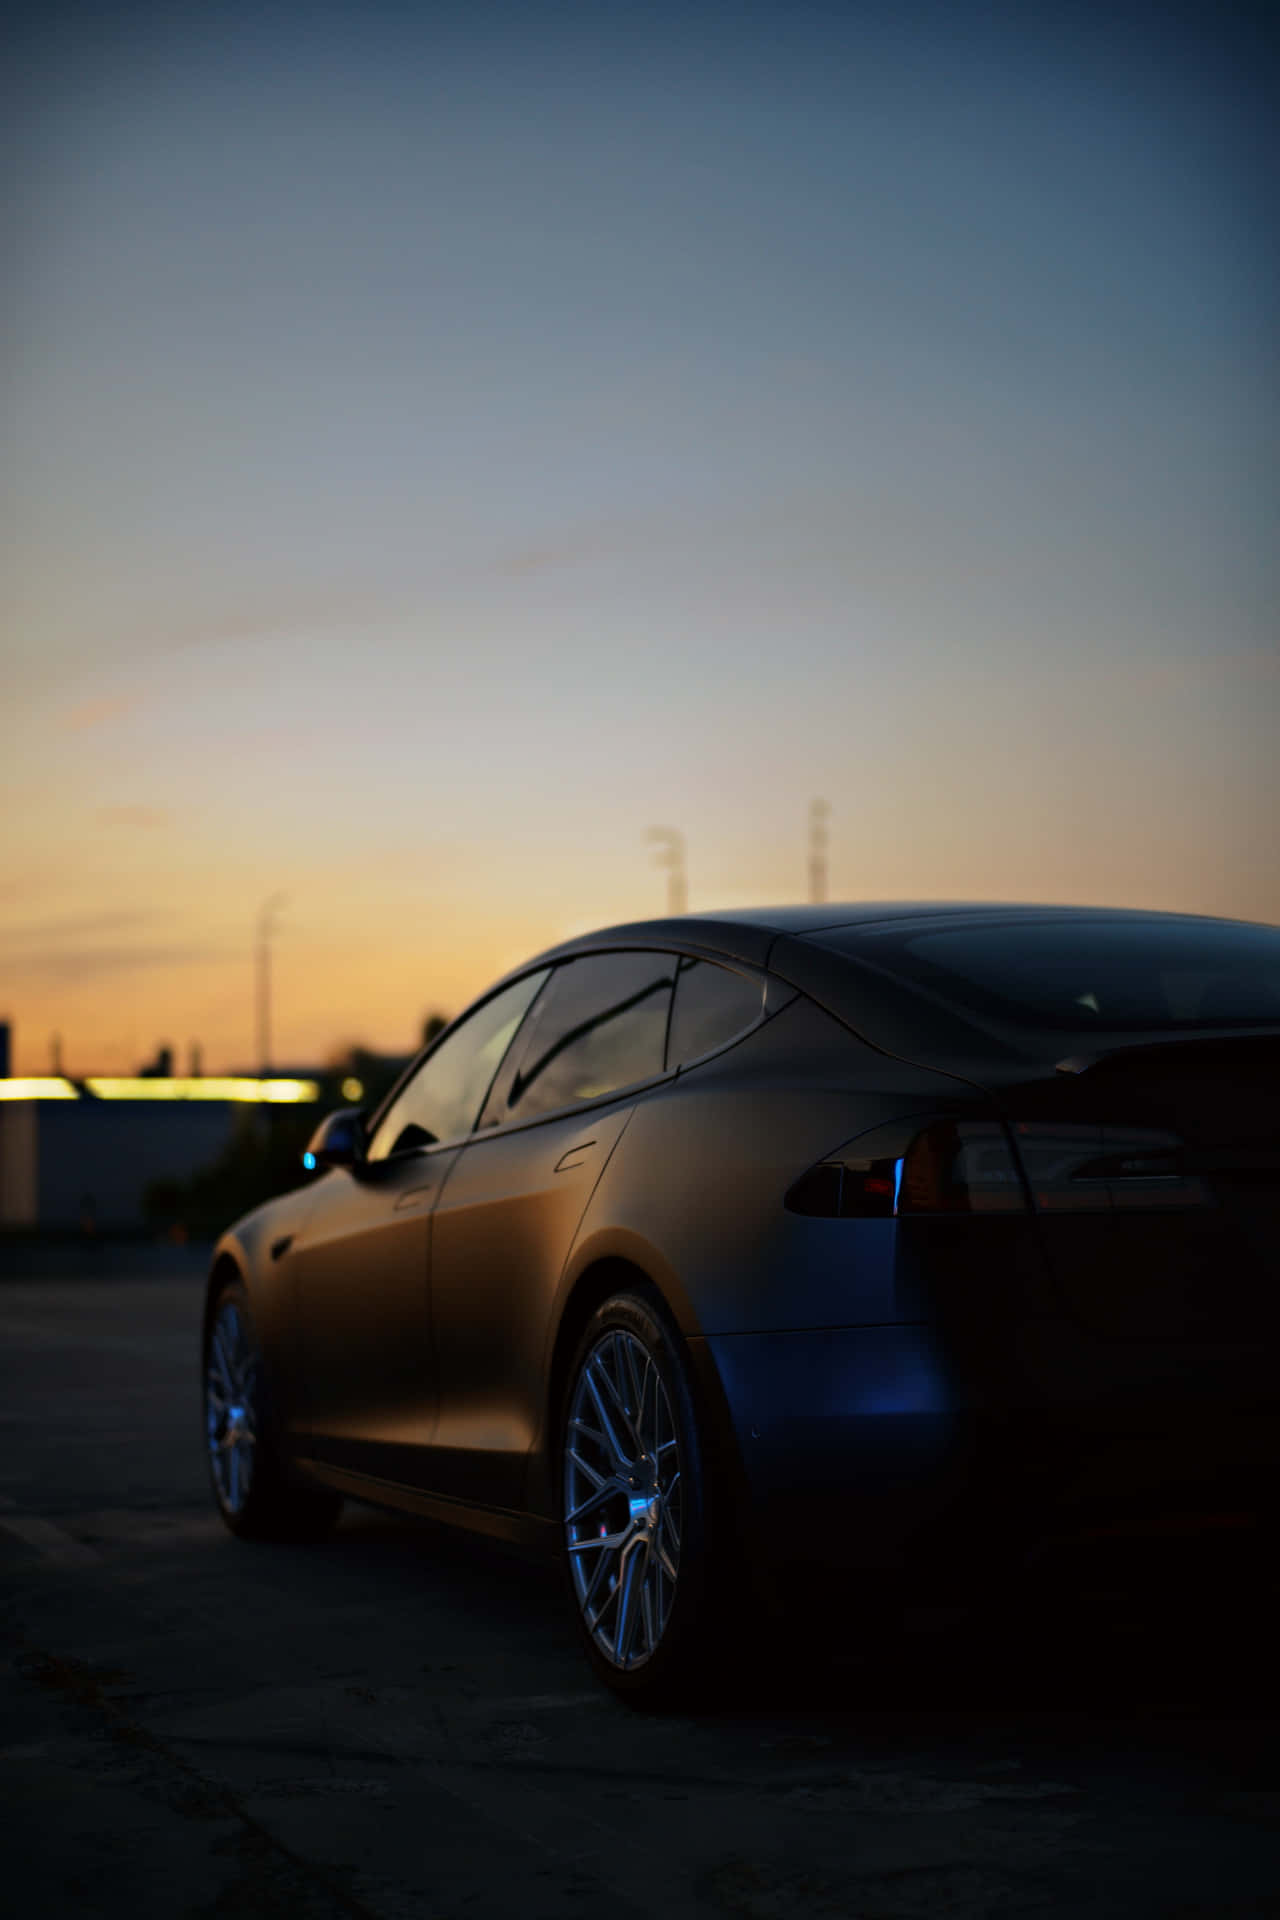 Get Charged up for the Future with the Tesla iPhone Wallpaper